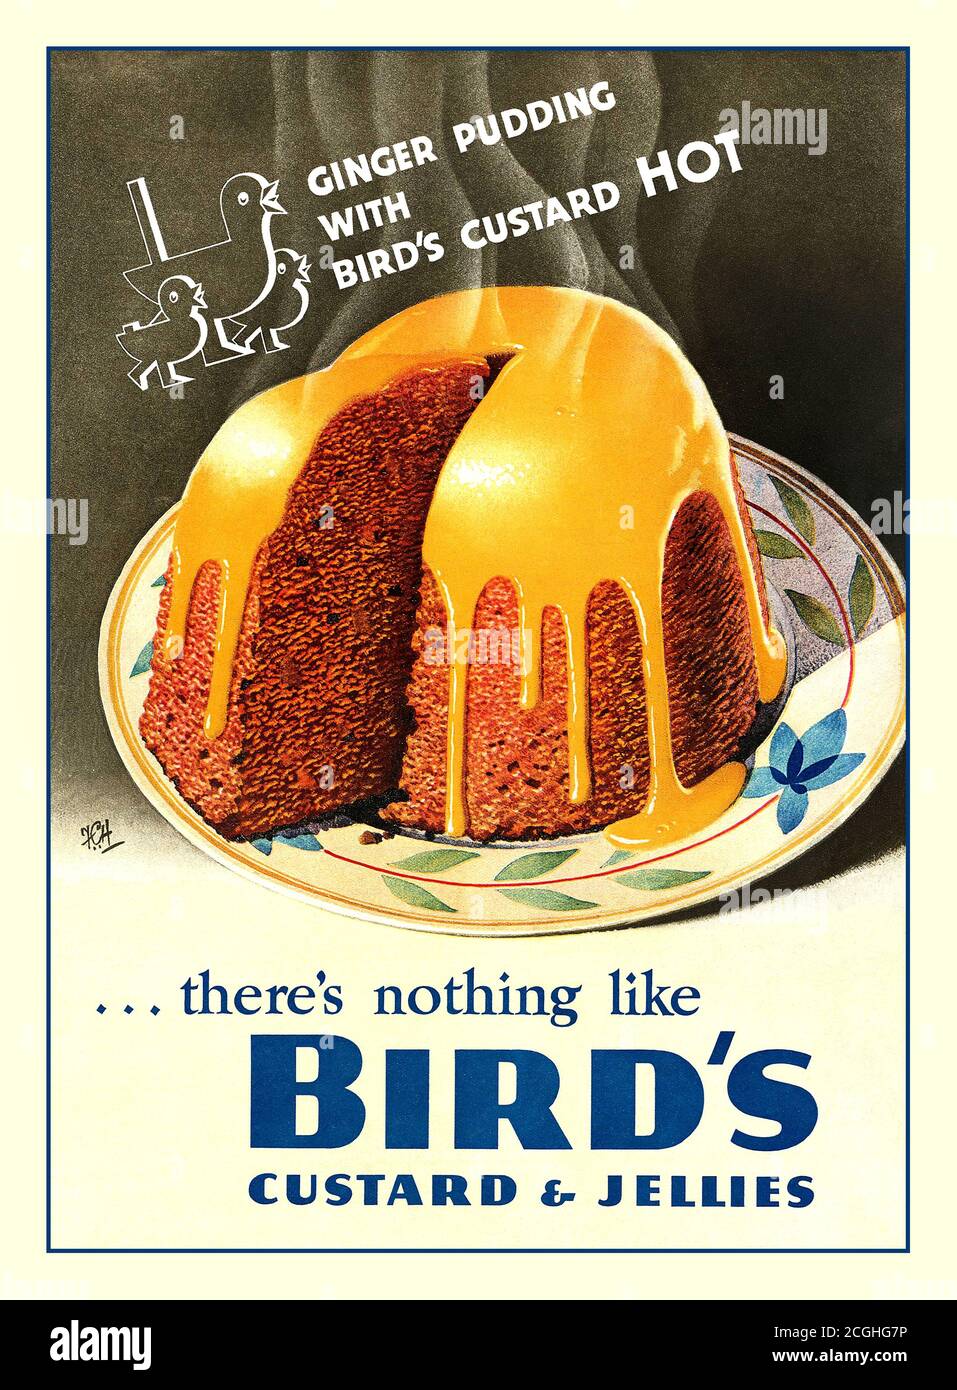 Vintage 1950’s illustration Birds Custard Advertising ‘there’s nothing like Birds custard and jellies’ featuring ‘Ginger Pudding with Bird’s Custard HOT’ Stock Photo